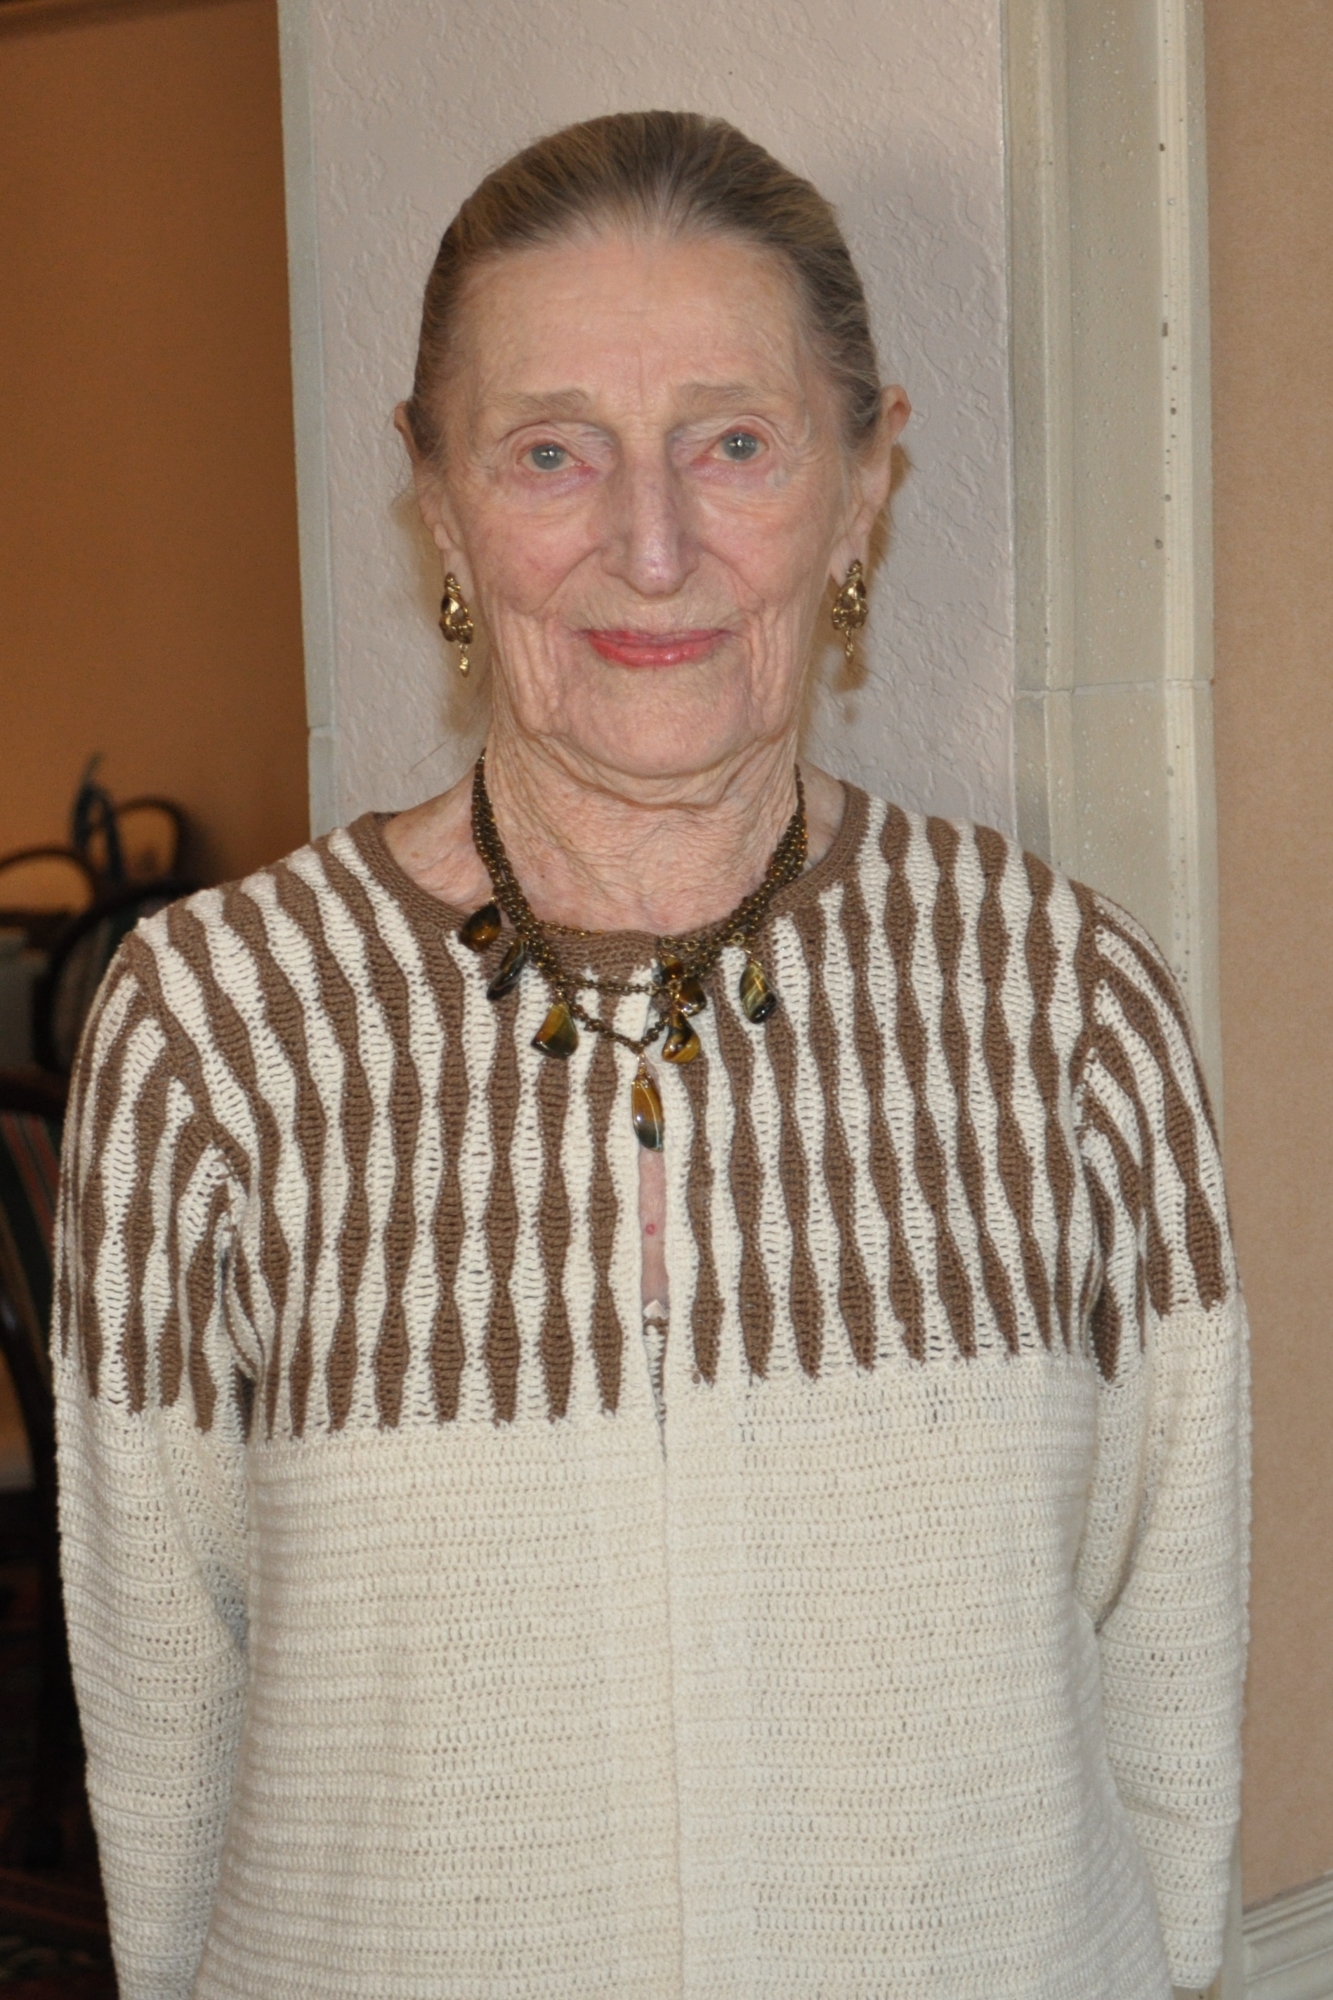 Ursula Pearson at her 100th birthday weekend in 2011. Photo by Molly Schechter.